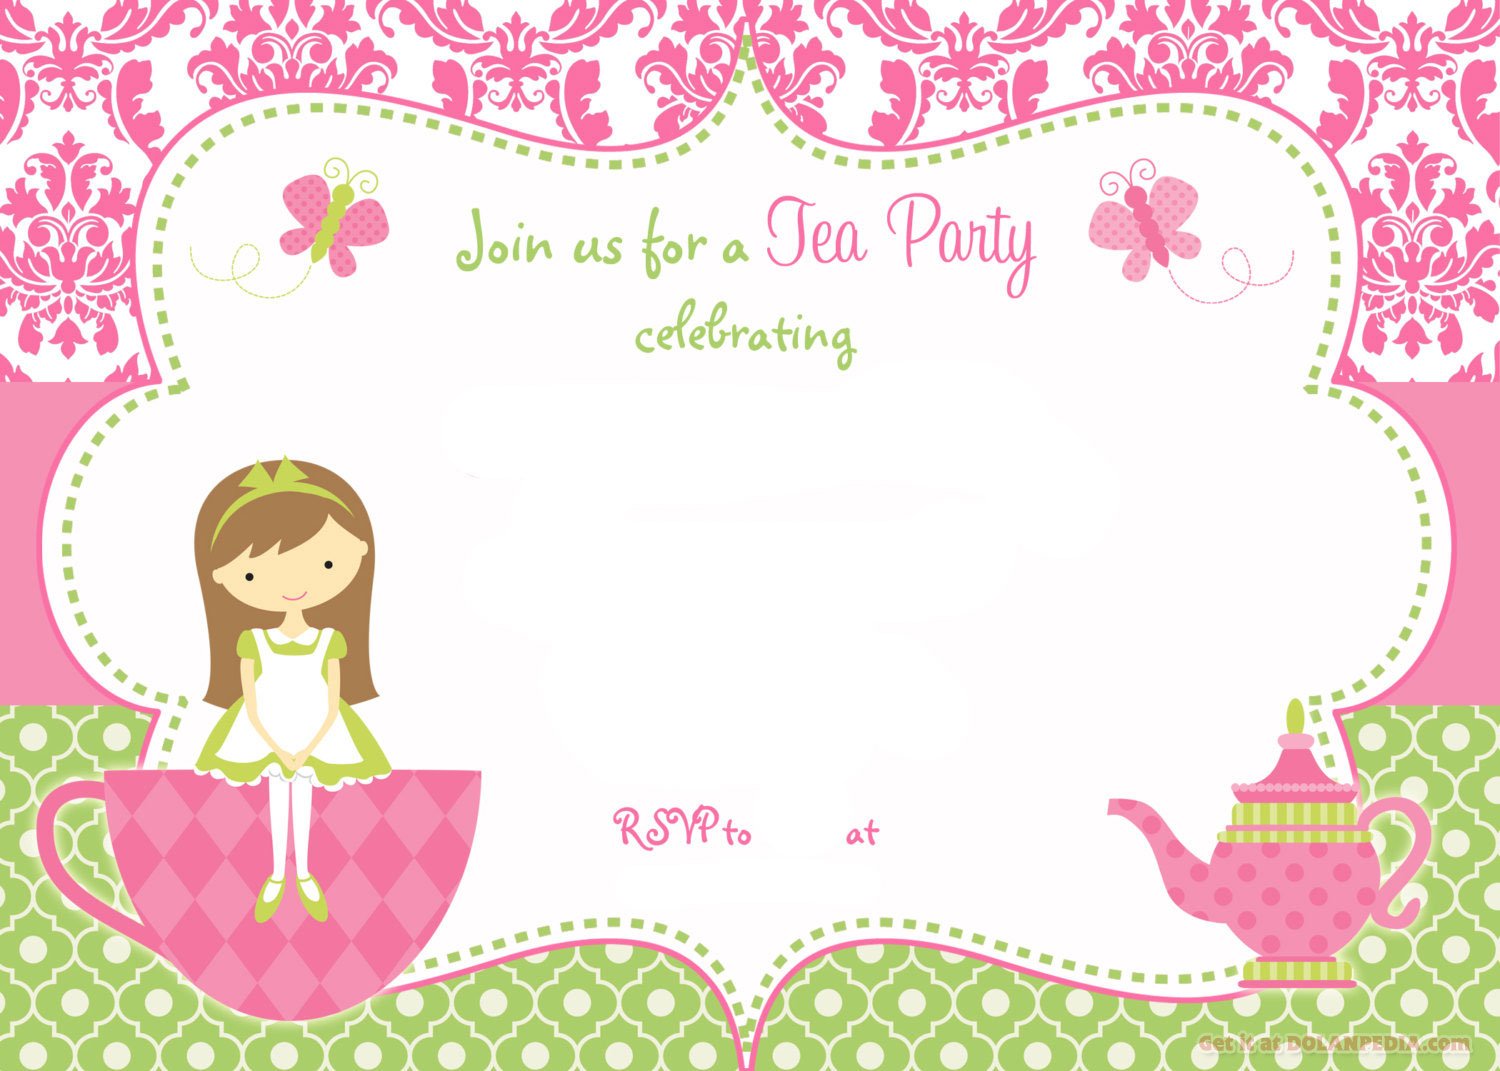 Free Printable Tea Party Invitation Template For Girl Download Hundreds FREE PRINTABLE